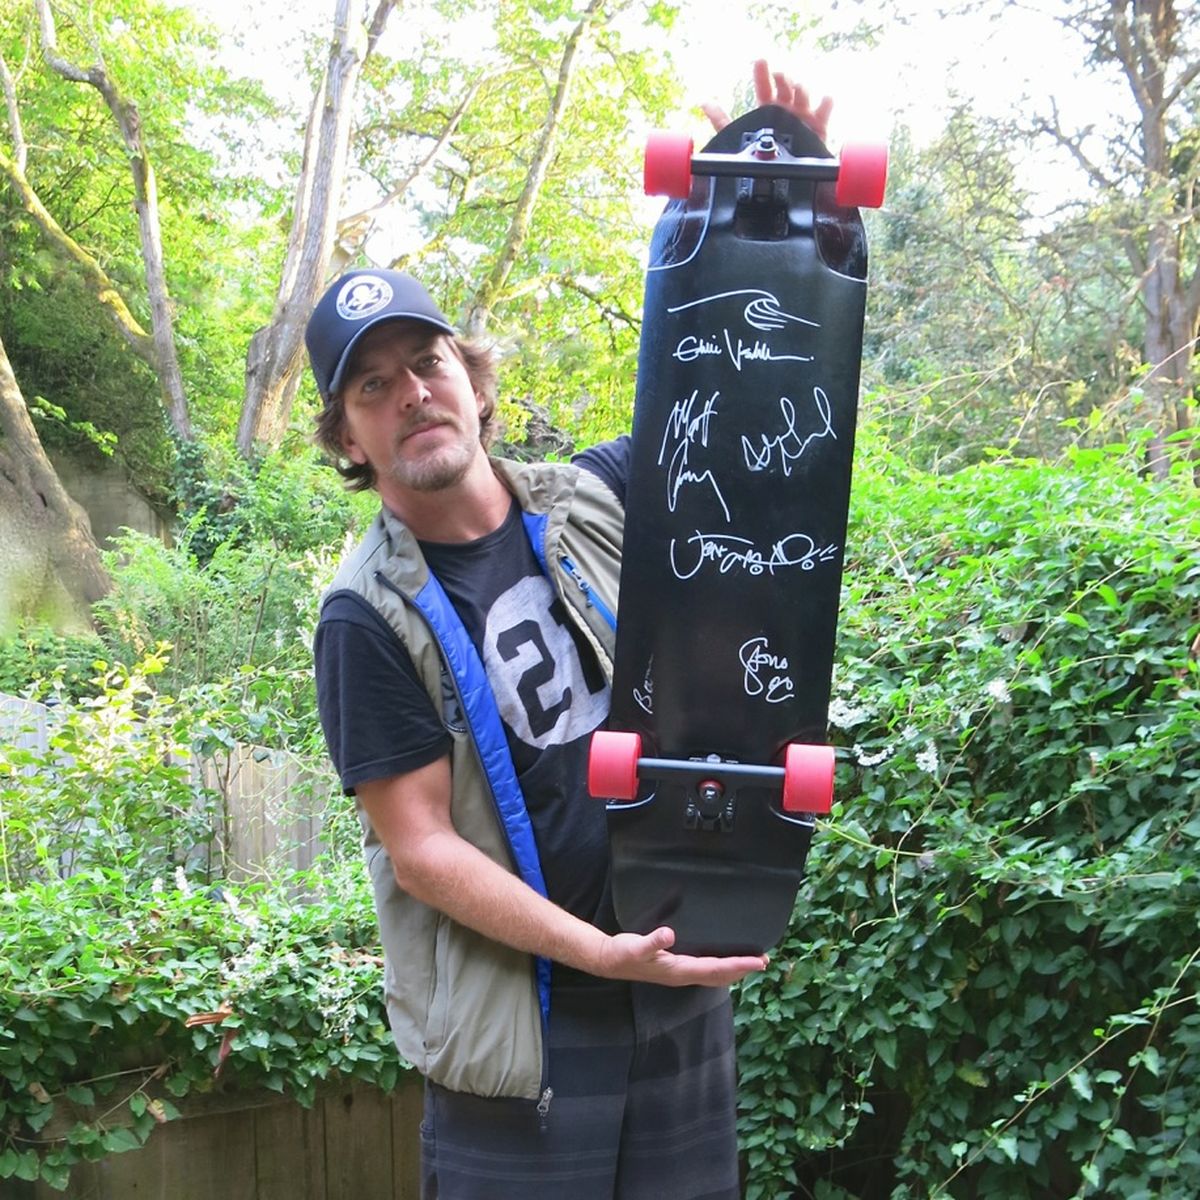 Eddie Vedder poses with a longboard he and band members from Pearl Jam signed for an auction to benefit the Ferry County Rail Trail. (Bob Whittaker)